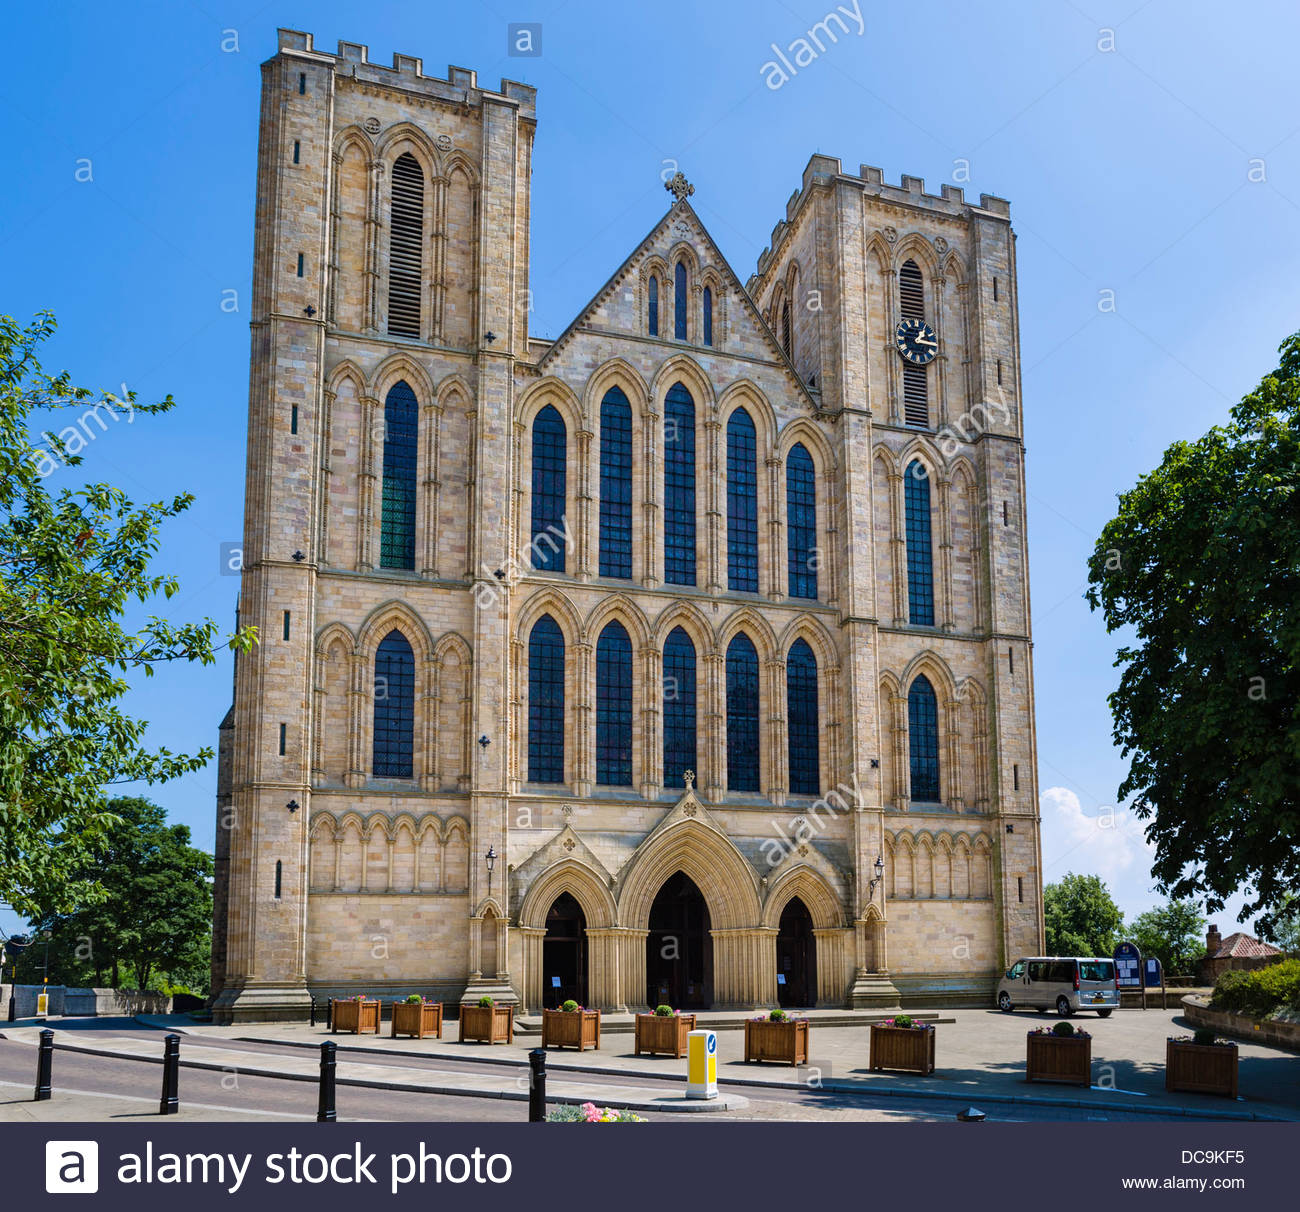 Images of Ripon Cathedral | 1300x1212